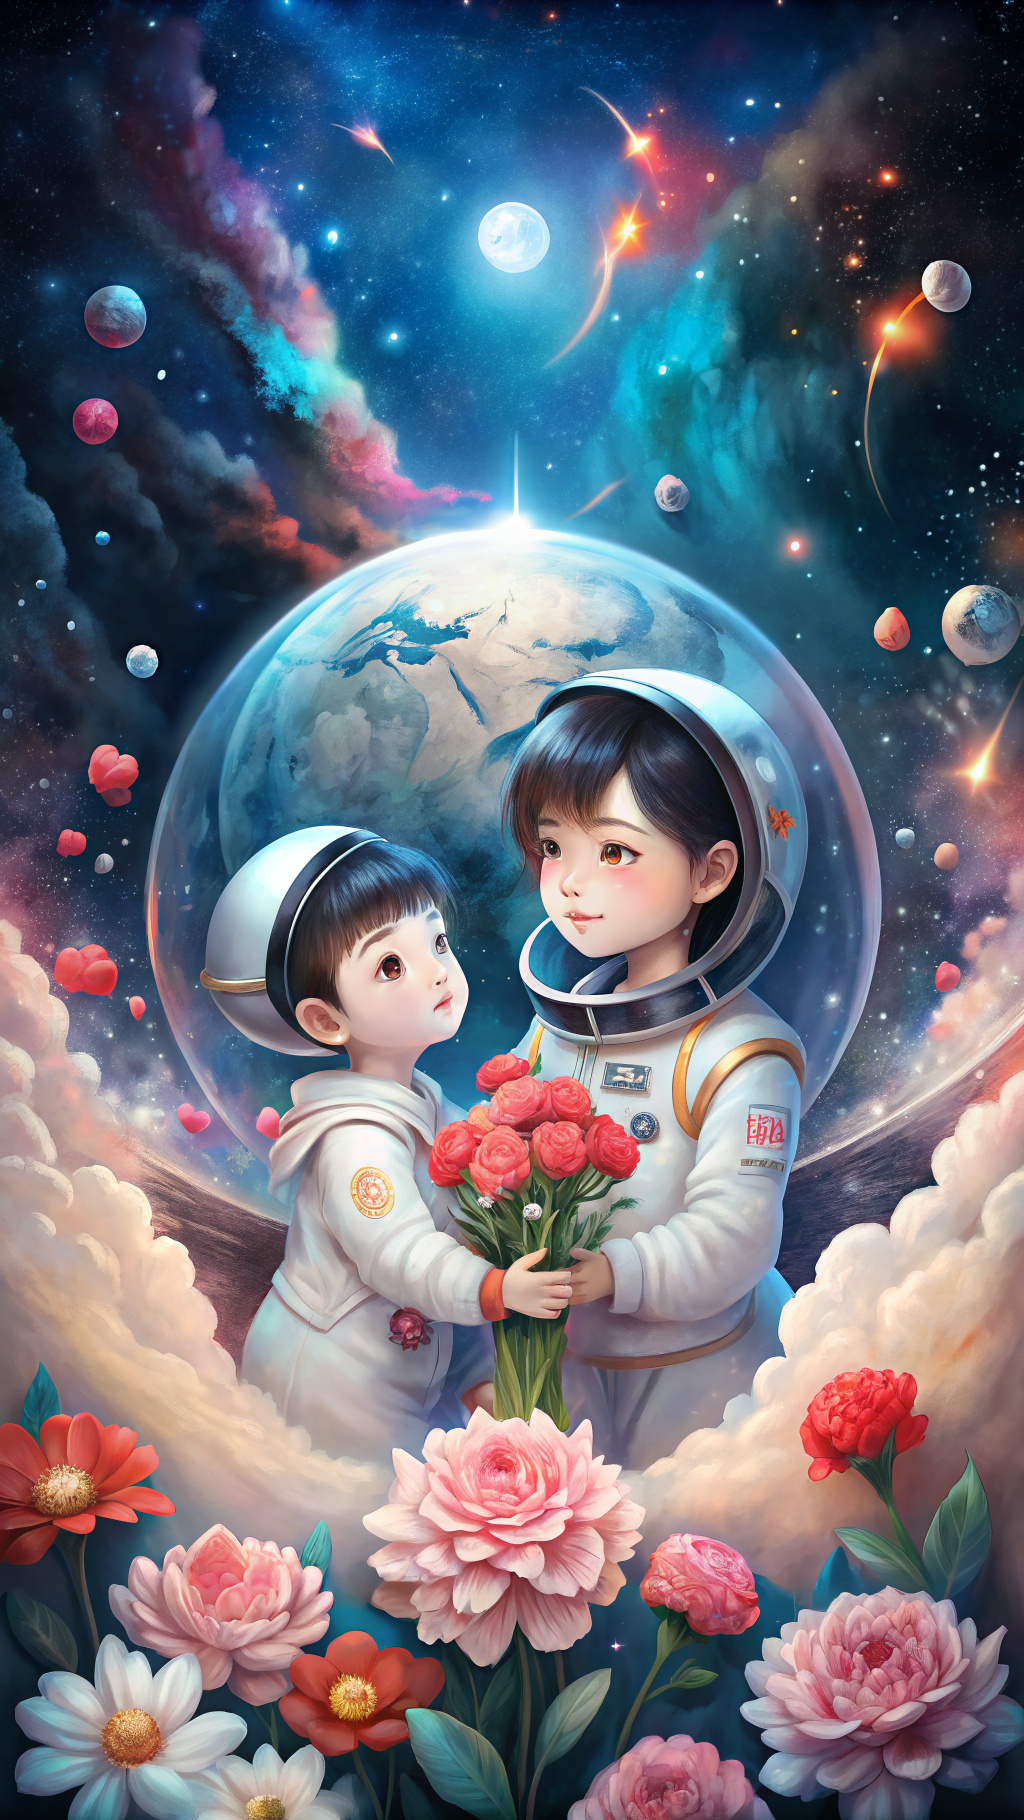 32K magical romantic Taiwanese manga painting style, Poser Art, ((ornate Taiwanese adorable hetersexual-couple)) as cute little tiny astronauts celebrate Mother's Day in space, carnations, English written text "Happy Mother's Day!"